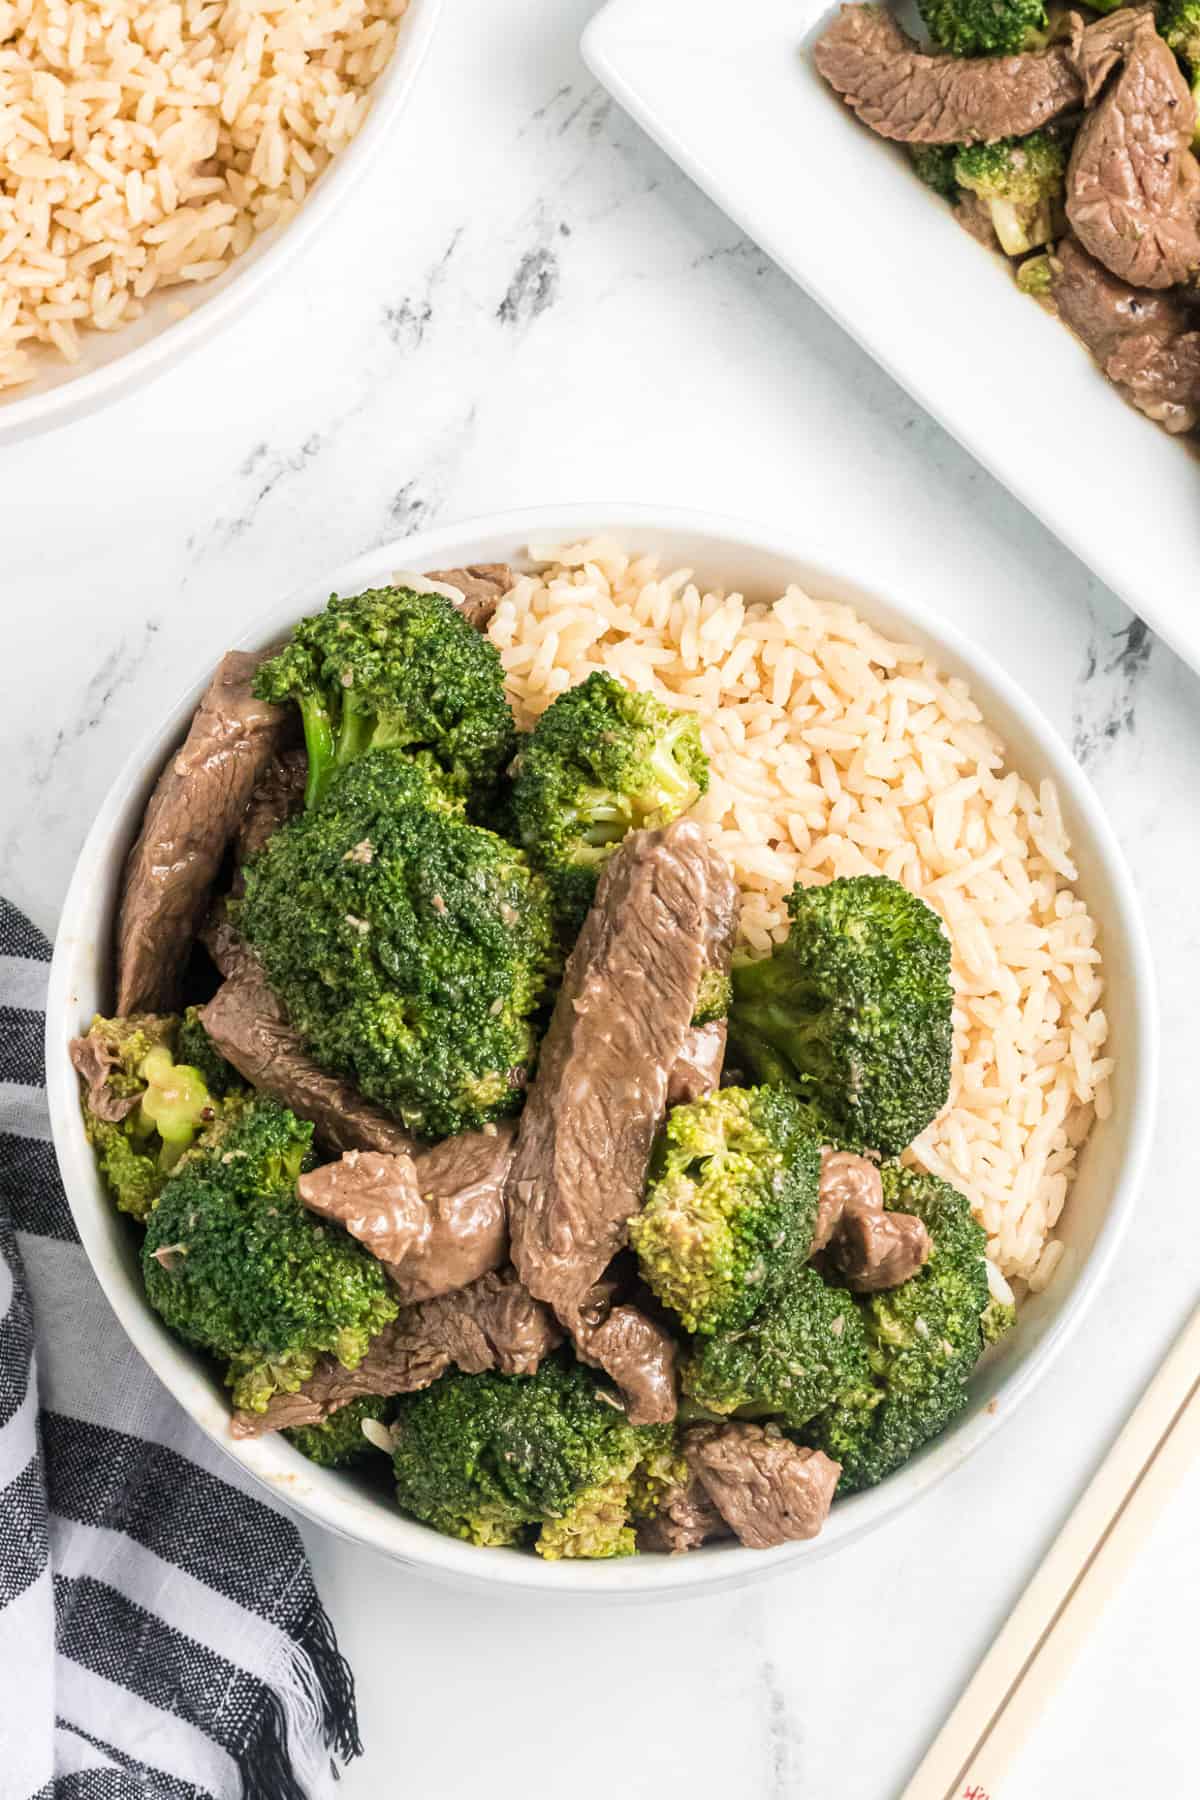 A bowl of rice with chunks of beef and broccoli in sauce.